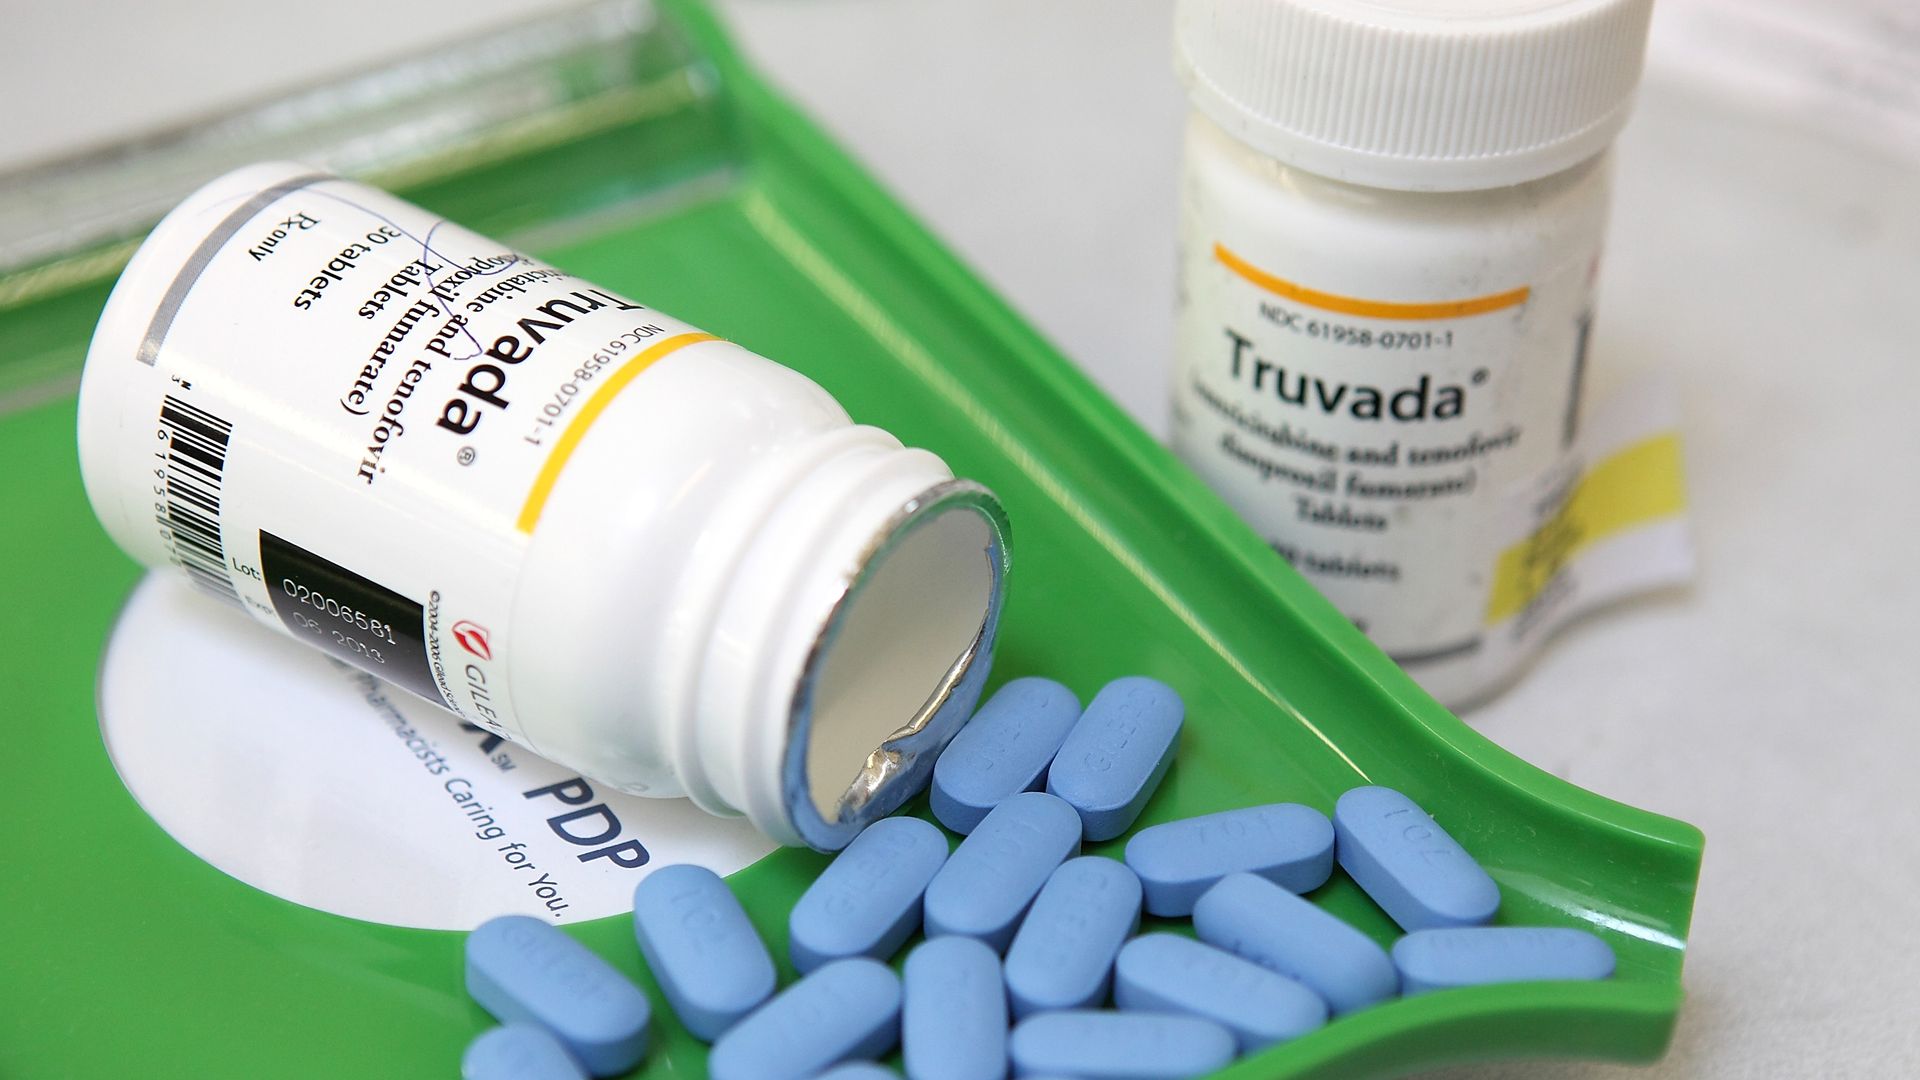 Two bottles of Truvada with the blue pills sitting in a green tray.